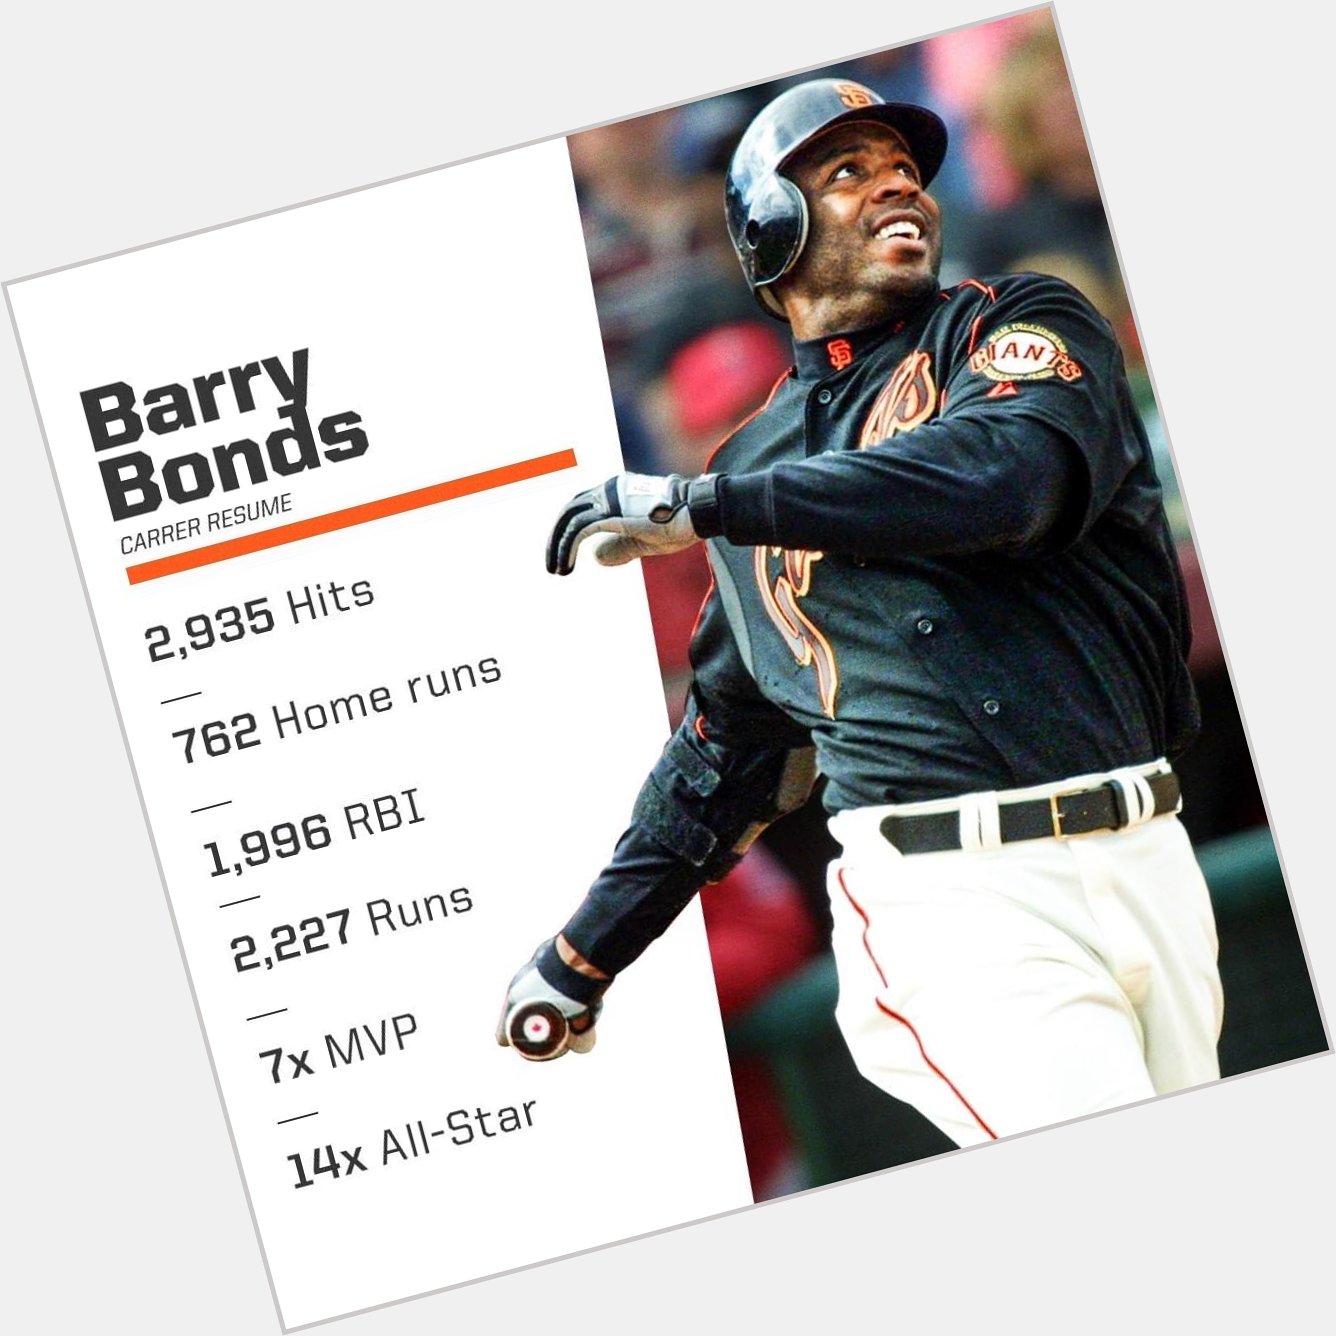 Happy birthday Barry Bonds; the greatest player of our lifetime. 